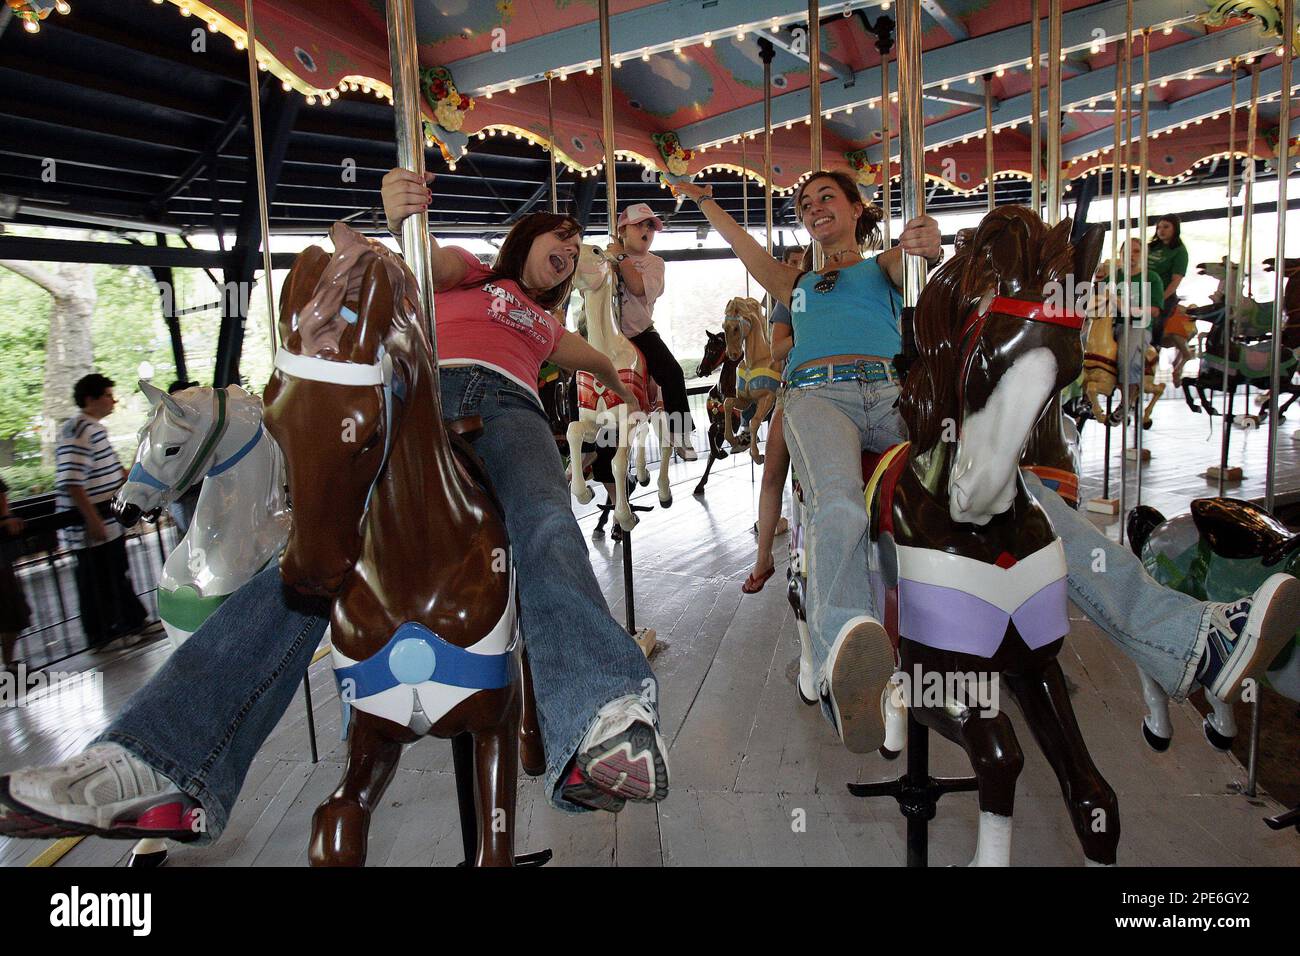 Keystone Oaks High School students Sarah Svidron, left, and friend Amanda Tylka take one of the first rides on the newly rebuilt 1926 wooden carousel at Kennywood Park in West Mifflin, Pa., image